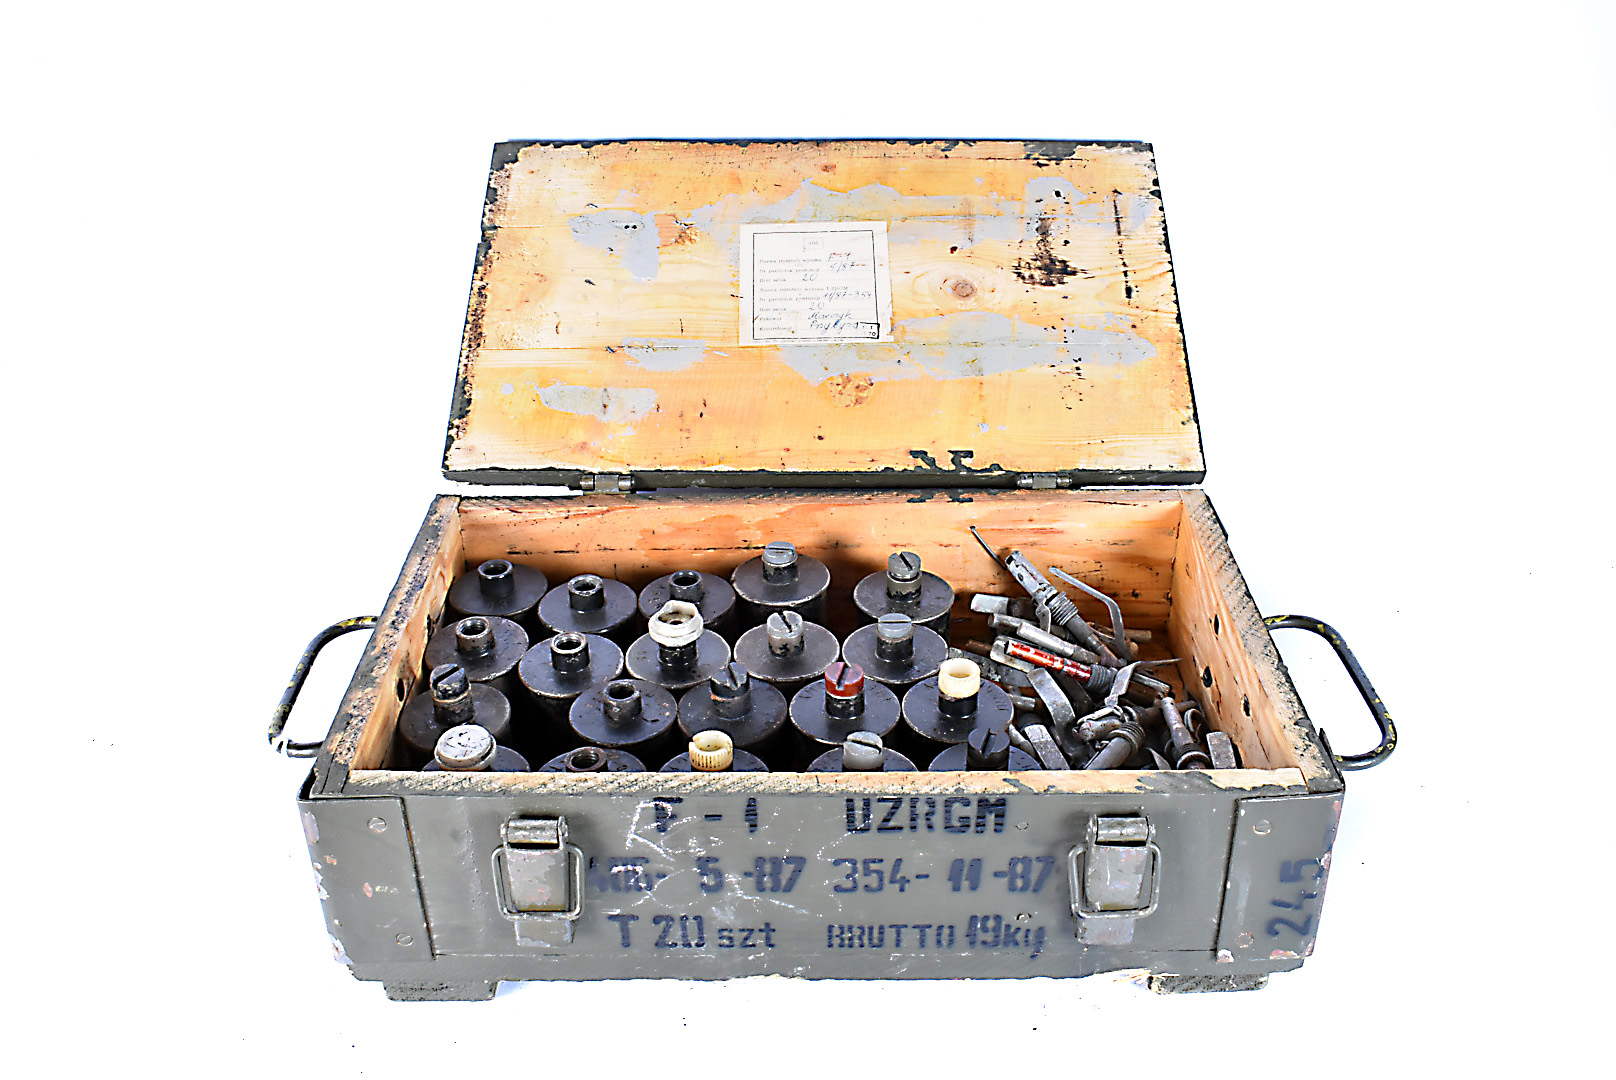 A collection of 20 RG-42 grenades with fuses, inert, in original fitted box with stencilling